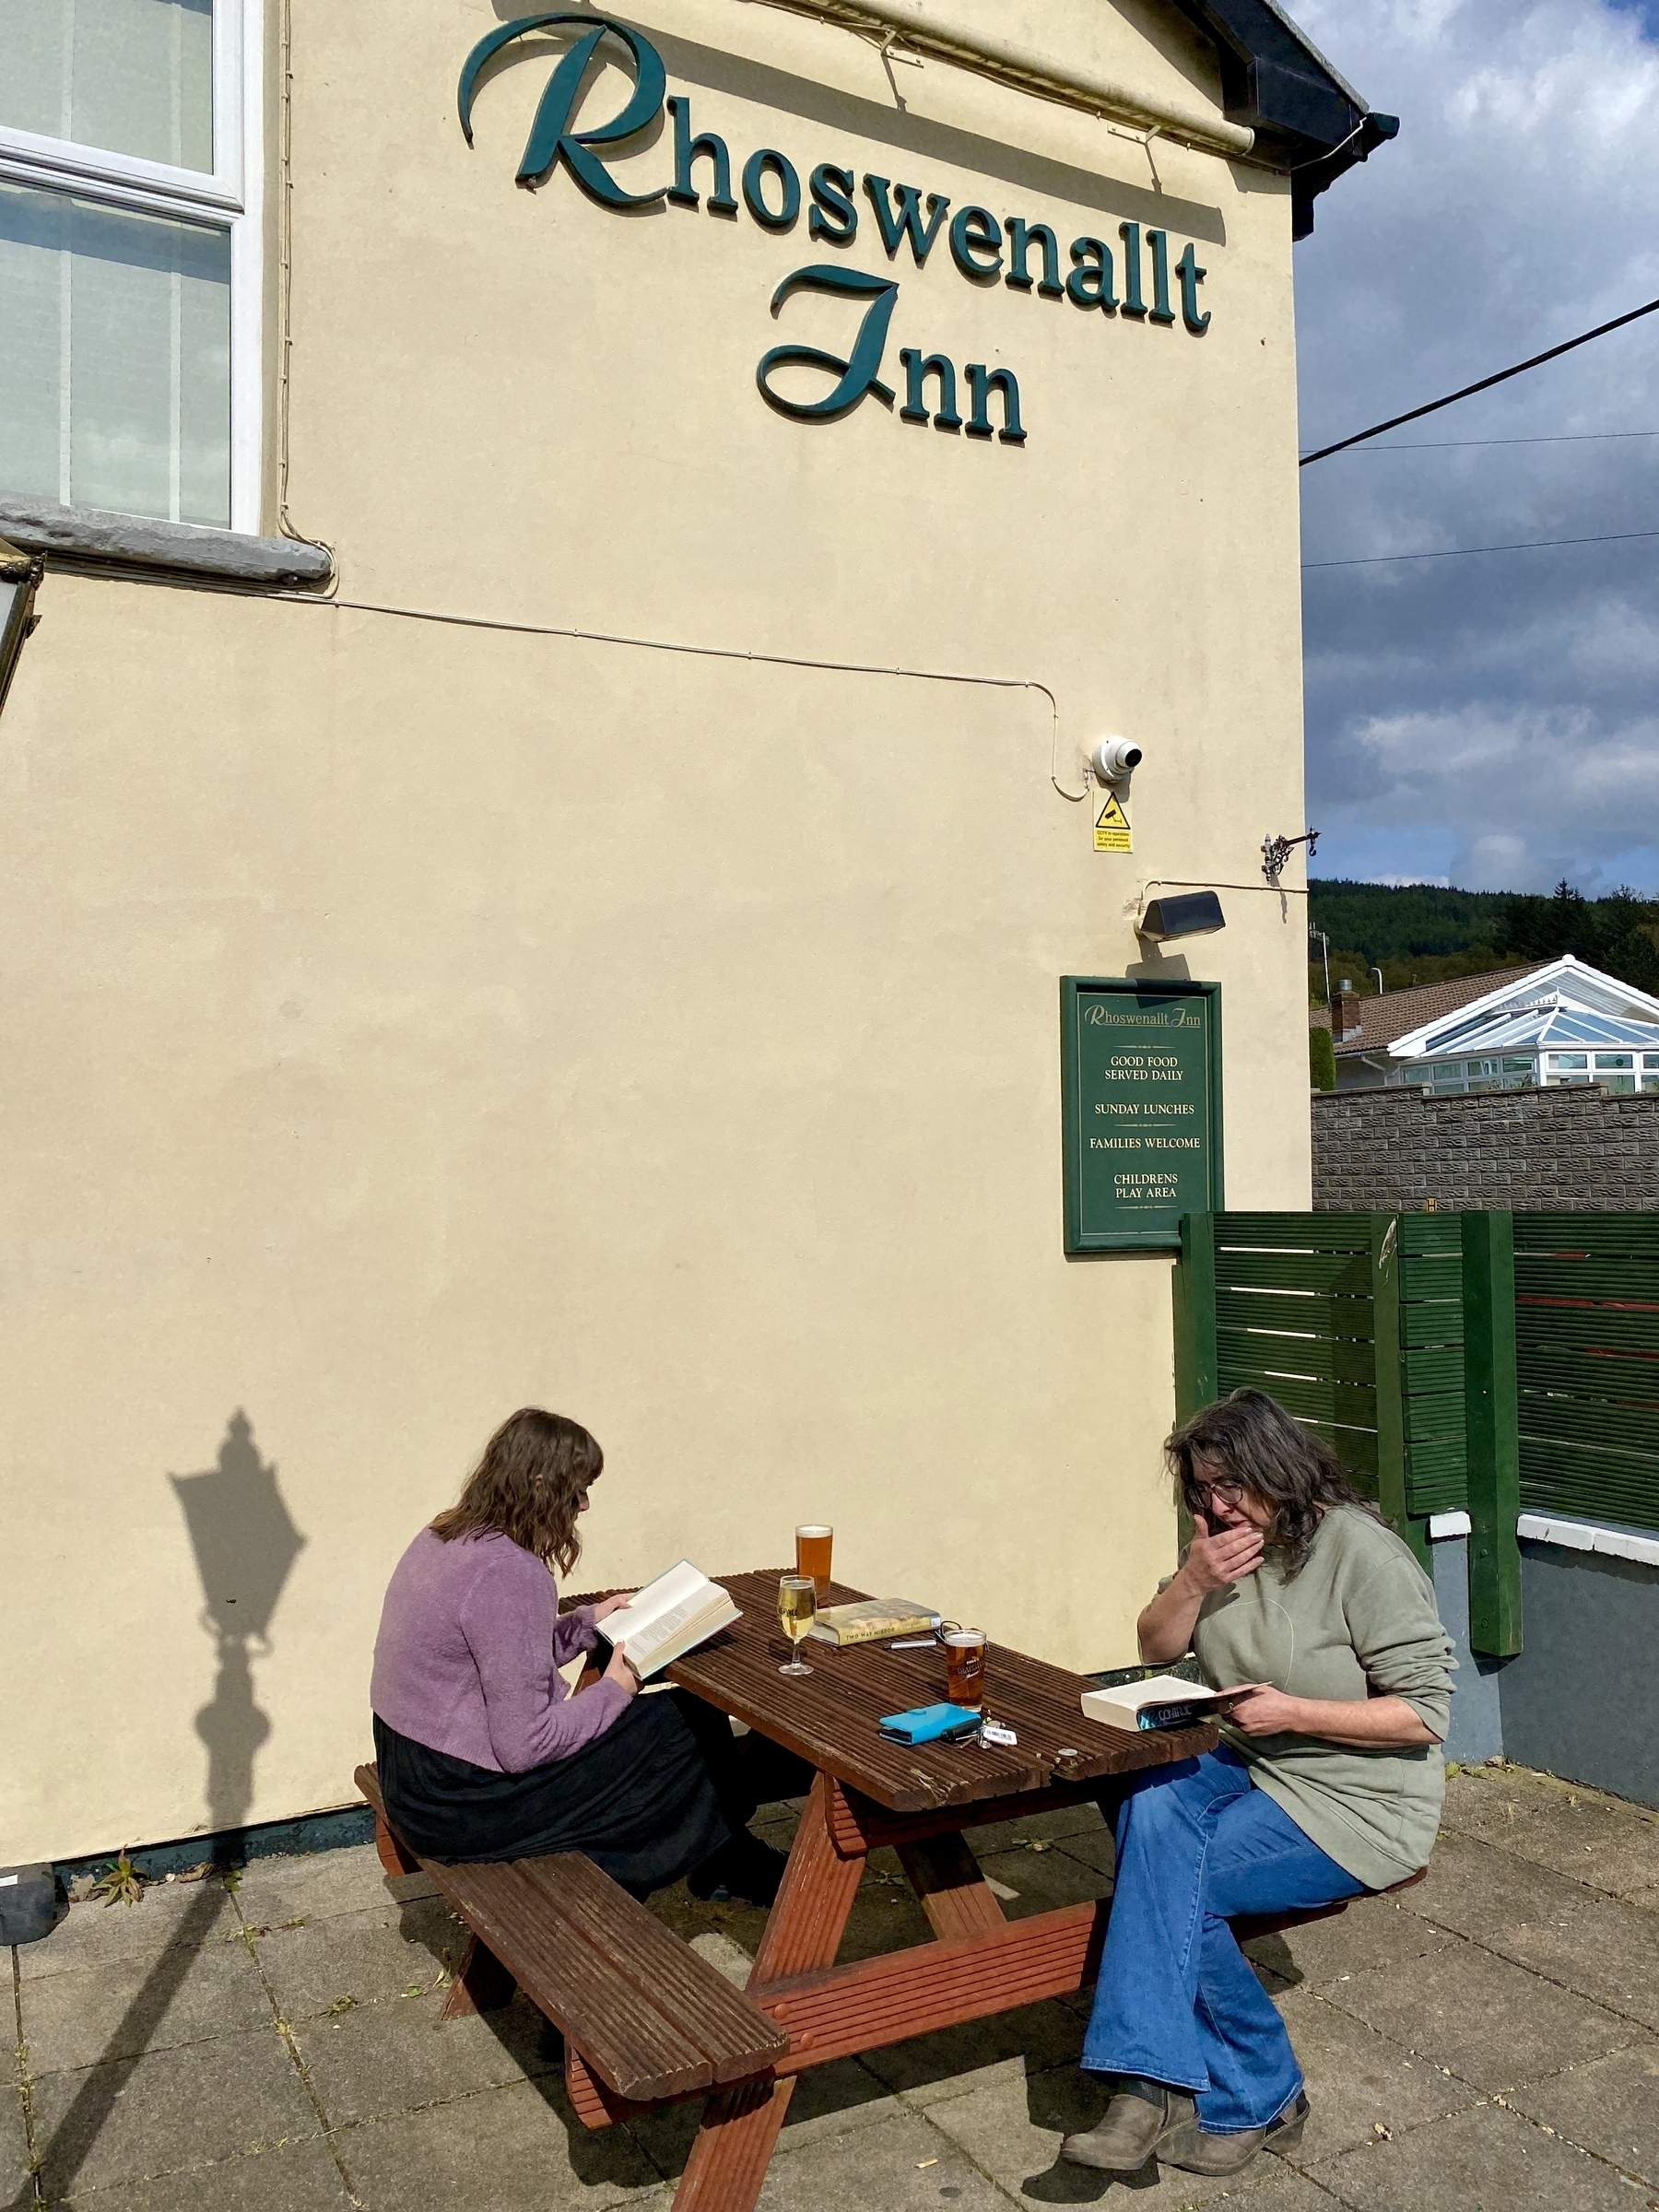 Two women reading books on a picnic bench outside a pub. Glasses of beer on the table.